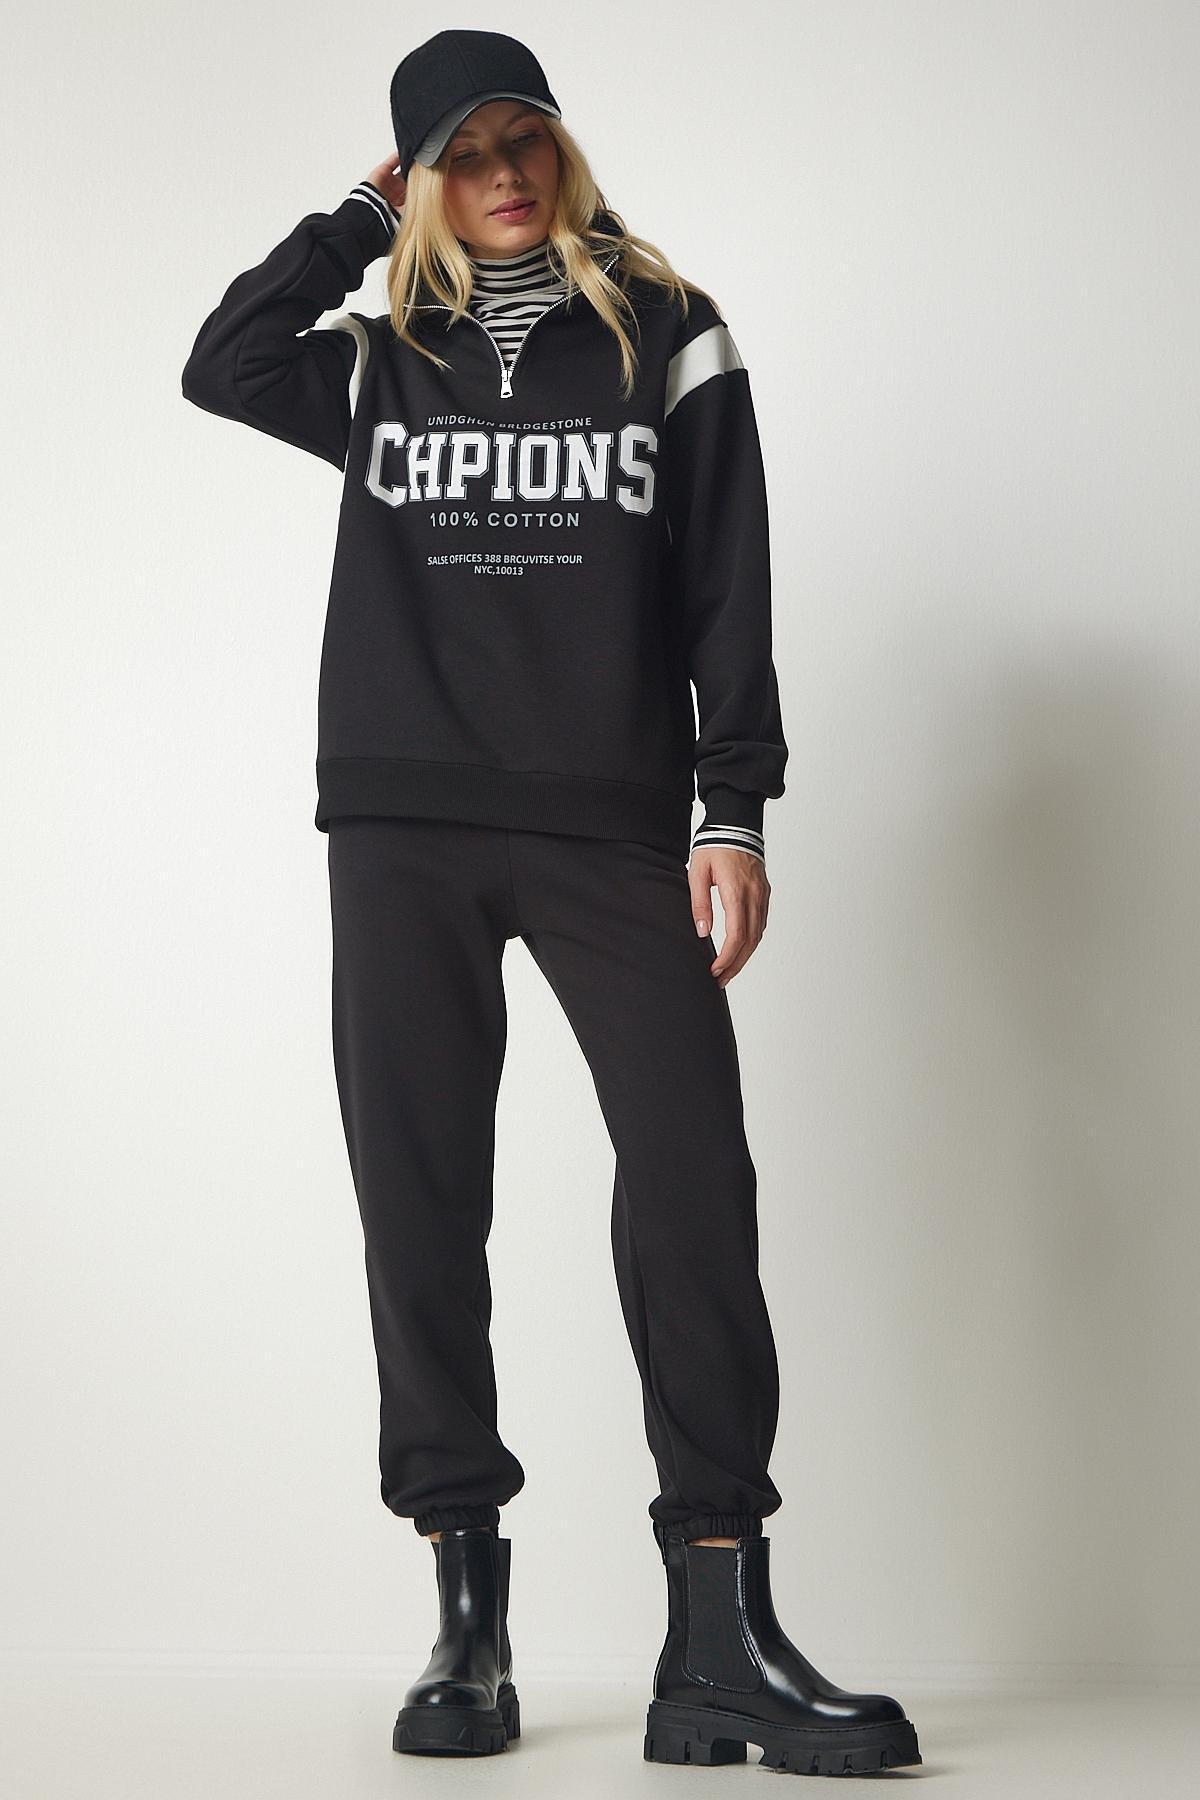 Happiness Istanbul - Black Zippered Printed Shark Tracksuit Set